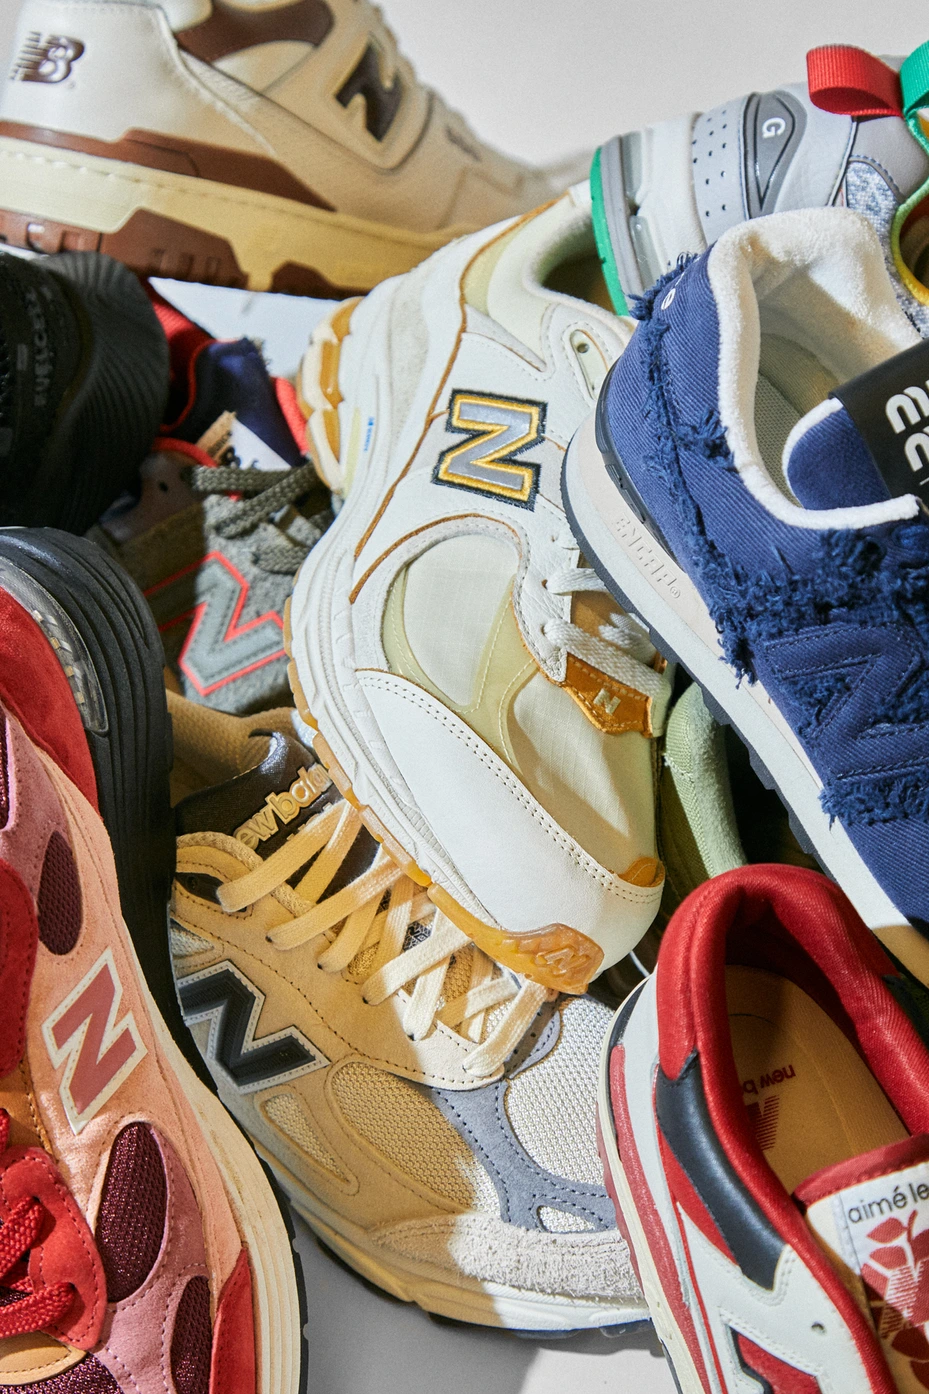 How New Balance Reinvented Its for the Future